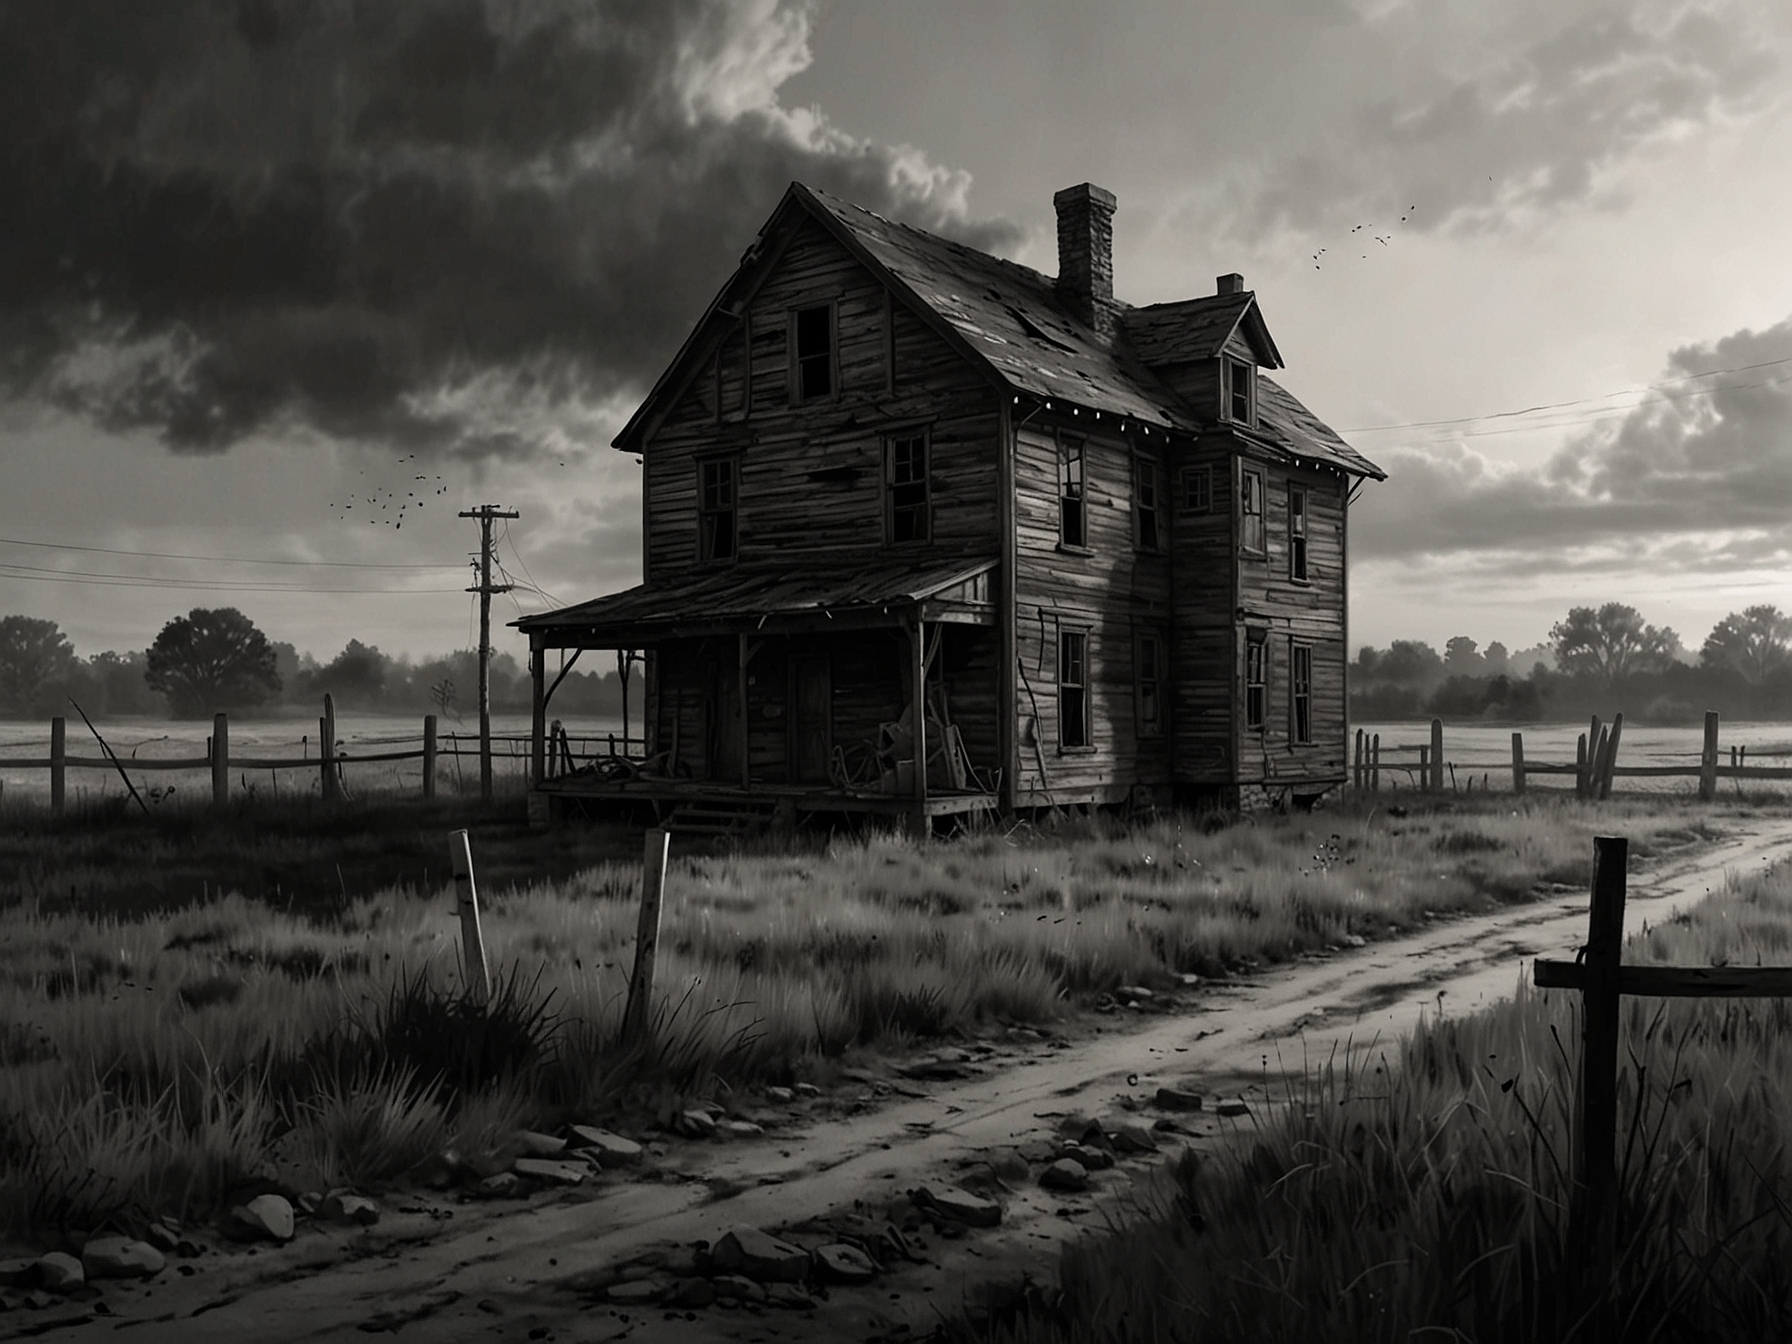 An eerie, desolate landscape from 'A Quiet Place: The Road Ahead,' featuring abandoned buildings and haunting silence, capturing the game's tense and atmospheric environment.